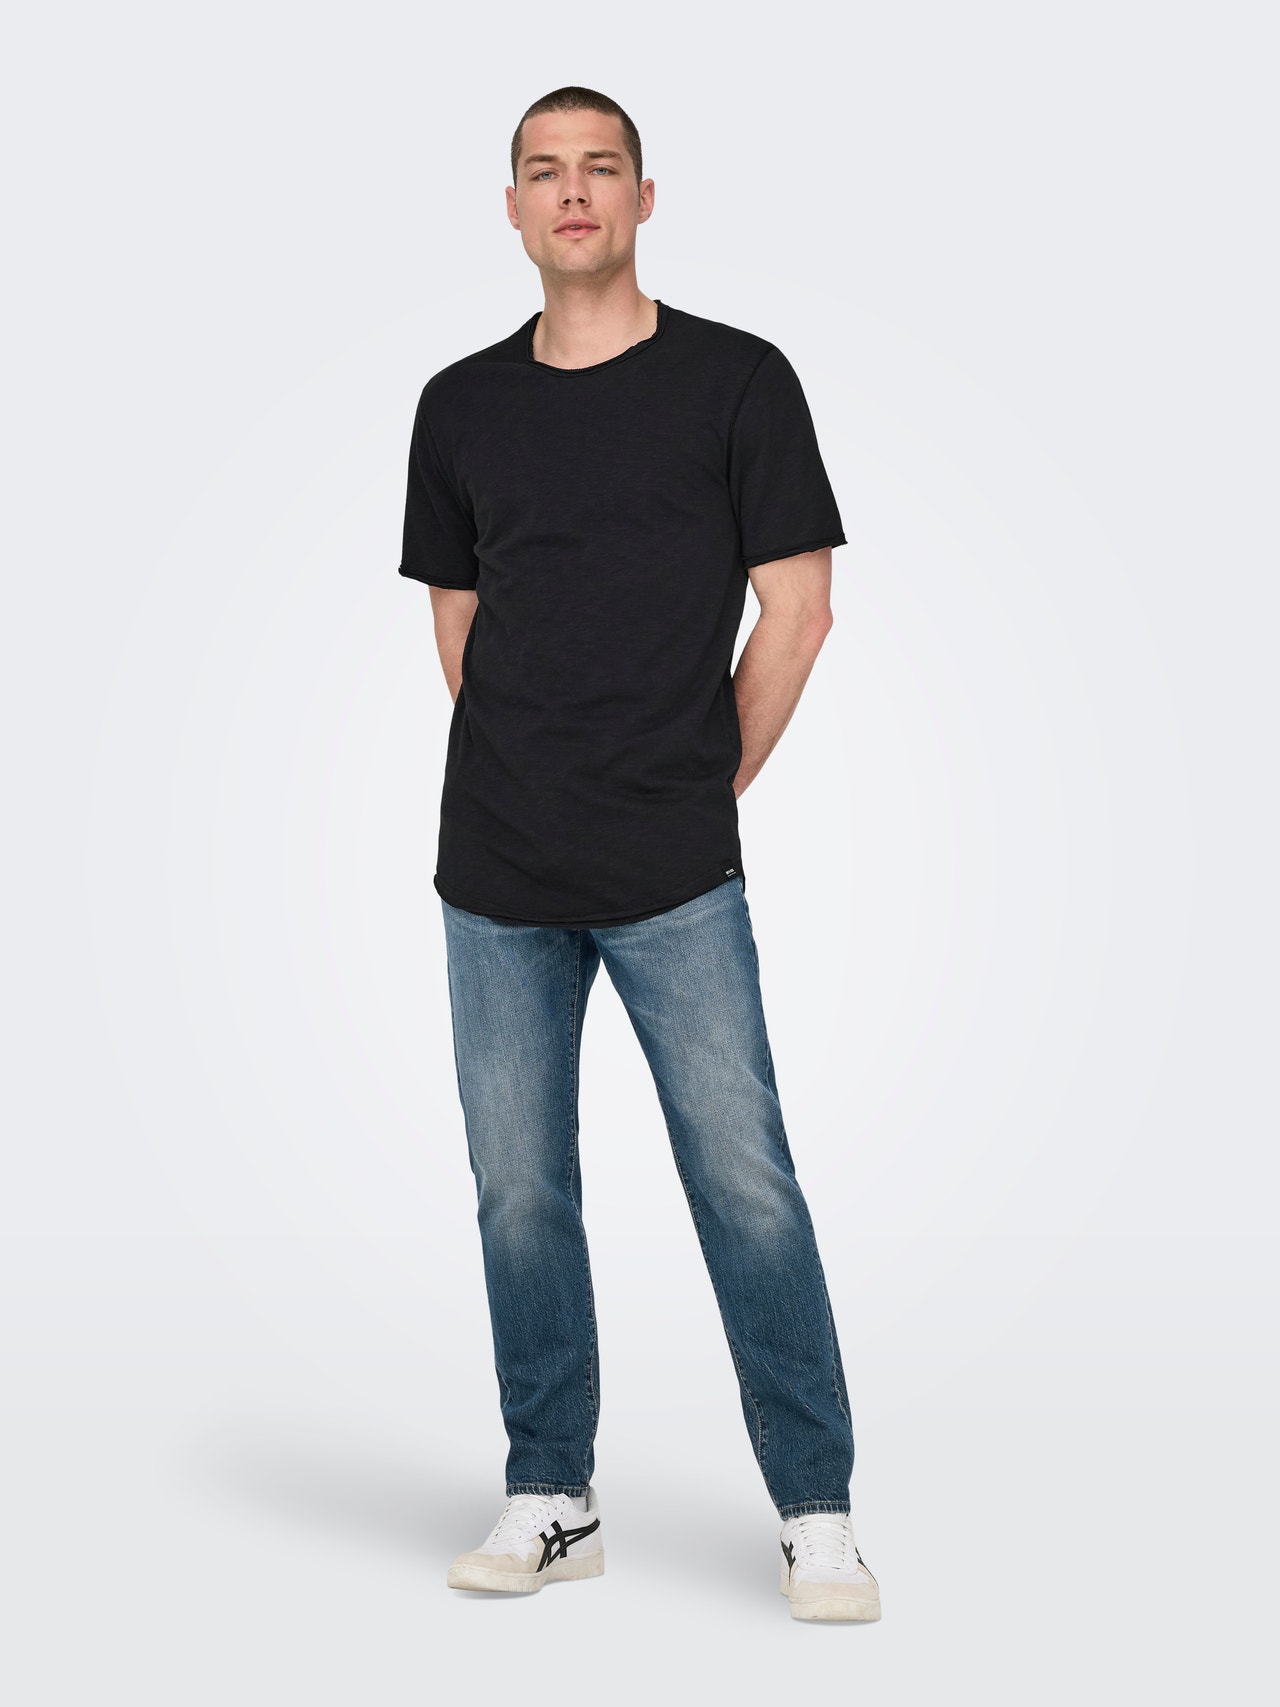 ONLY & SONS Long Line Fit Round Neck T-Shirt -Black - 22017822